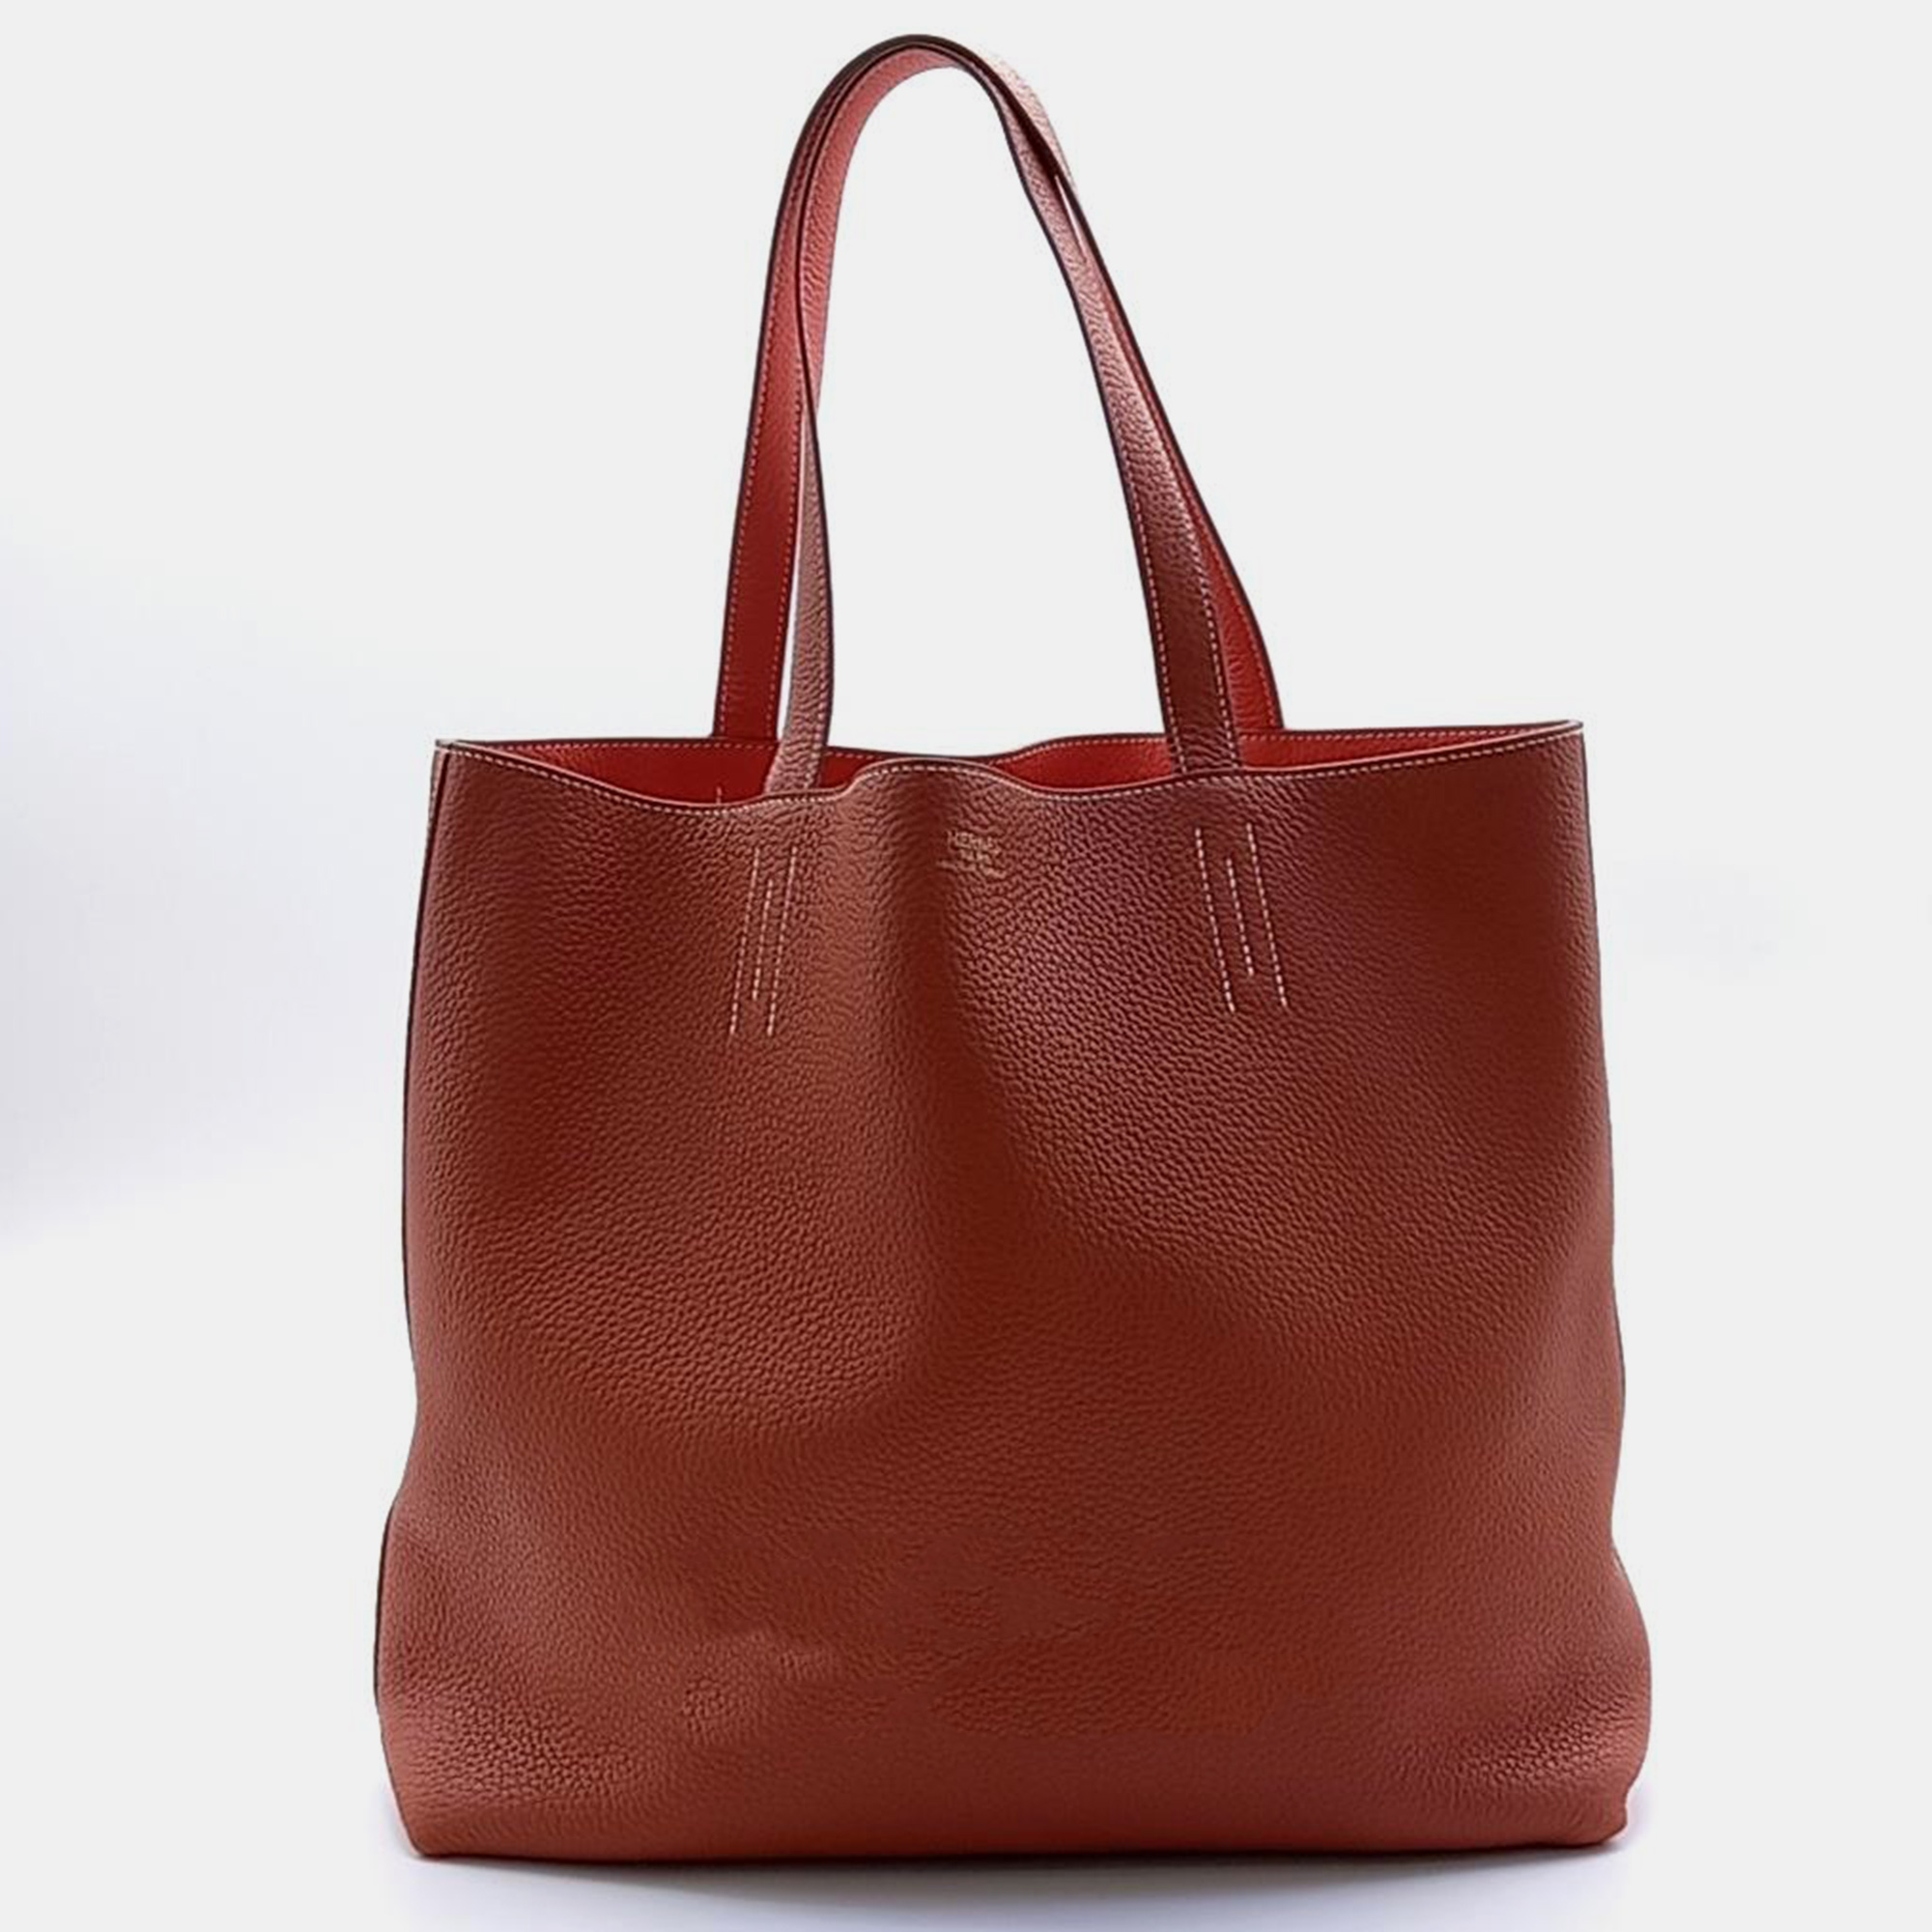 Elevate your elegance with an Hermès tote a symbol of luxury and prestige. Meticulously crafted from the finest materials it seamlessly blends timeless style with unparalleled craftsmanship.